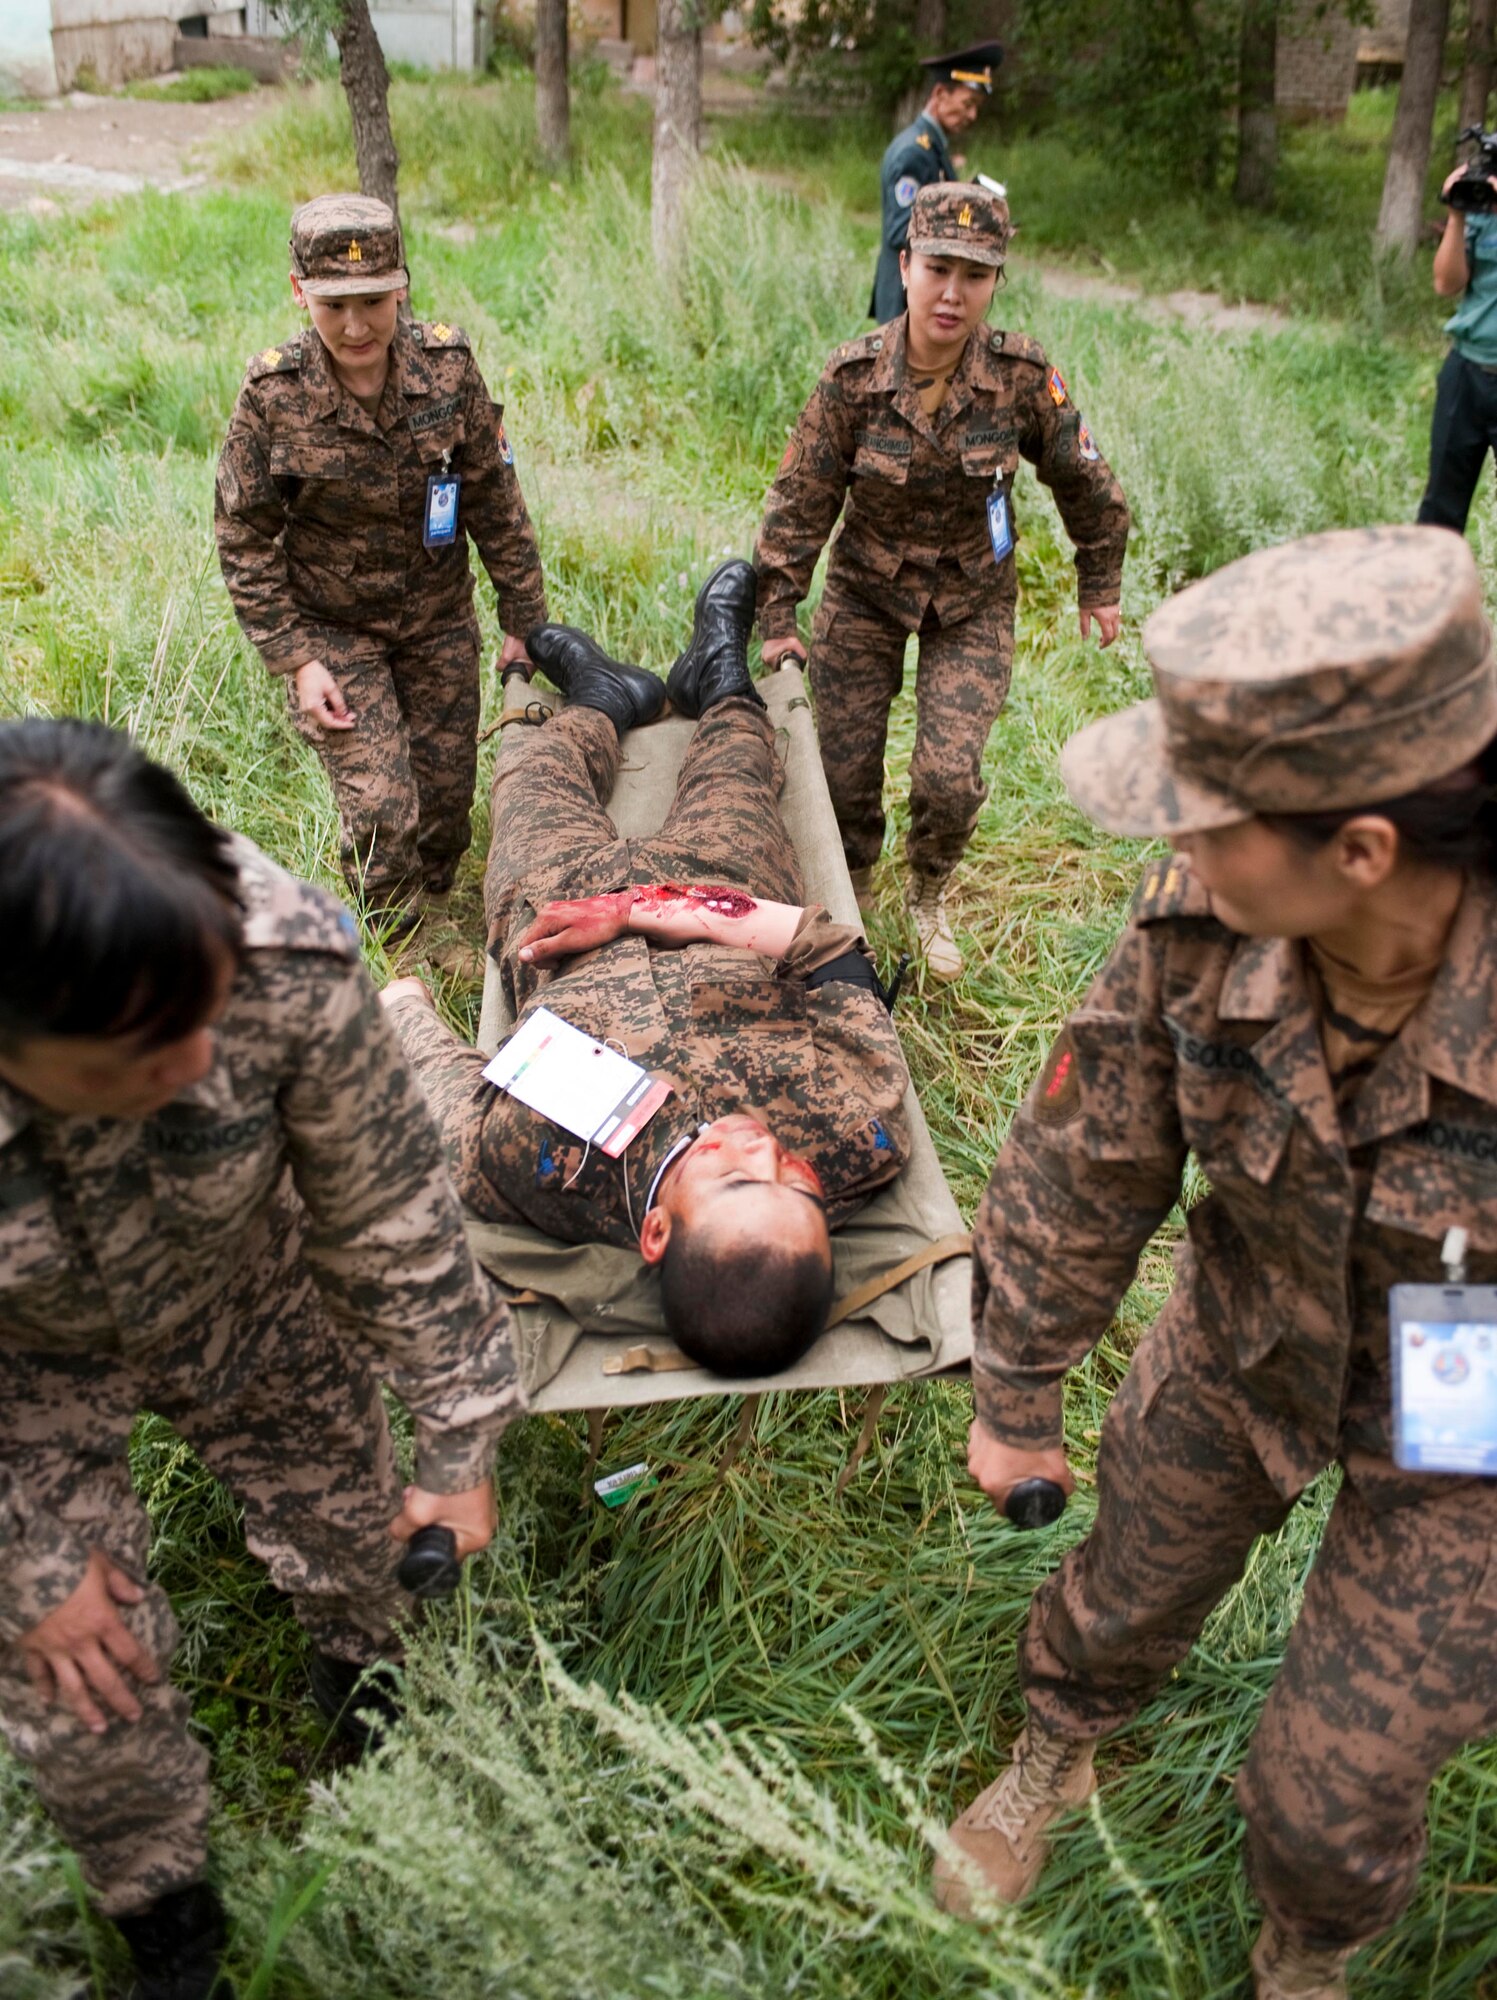 Mongolian armed forces first responders move victims during a during a mass casualty response exercise as part of Operation Pacific Angel 14-4 Mongolia, Aug. 8 2014, Ulaanbaatar, Mongolia. Operation PACANGEL helped cultivate common bonds and fosters goodwill between the U.S., Mongolia and regional nations by conducting multilateral humanitarian assistance and civil military operations. (U.S. Air Force photo/Staff Sgt. William Banton)